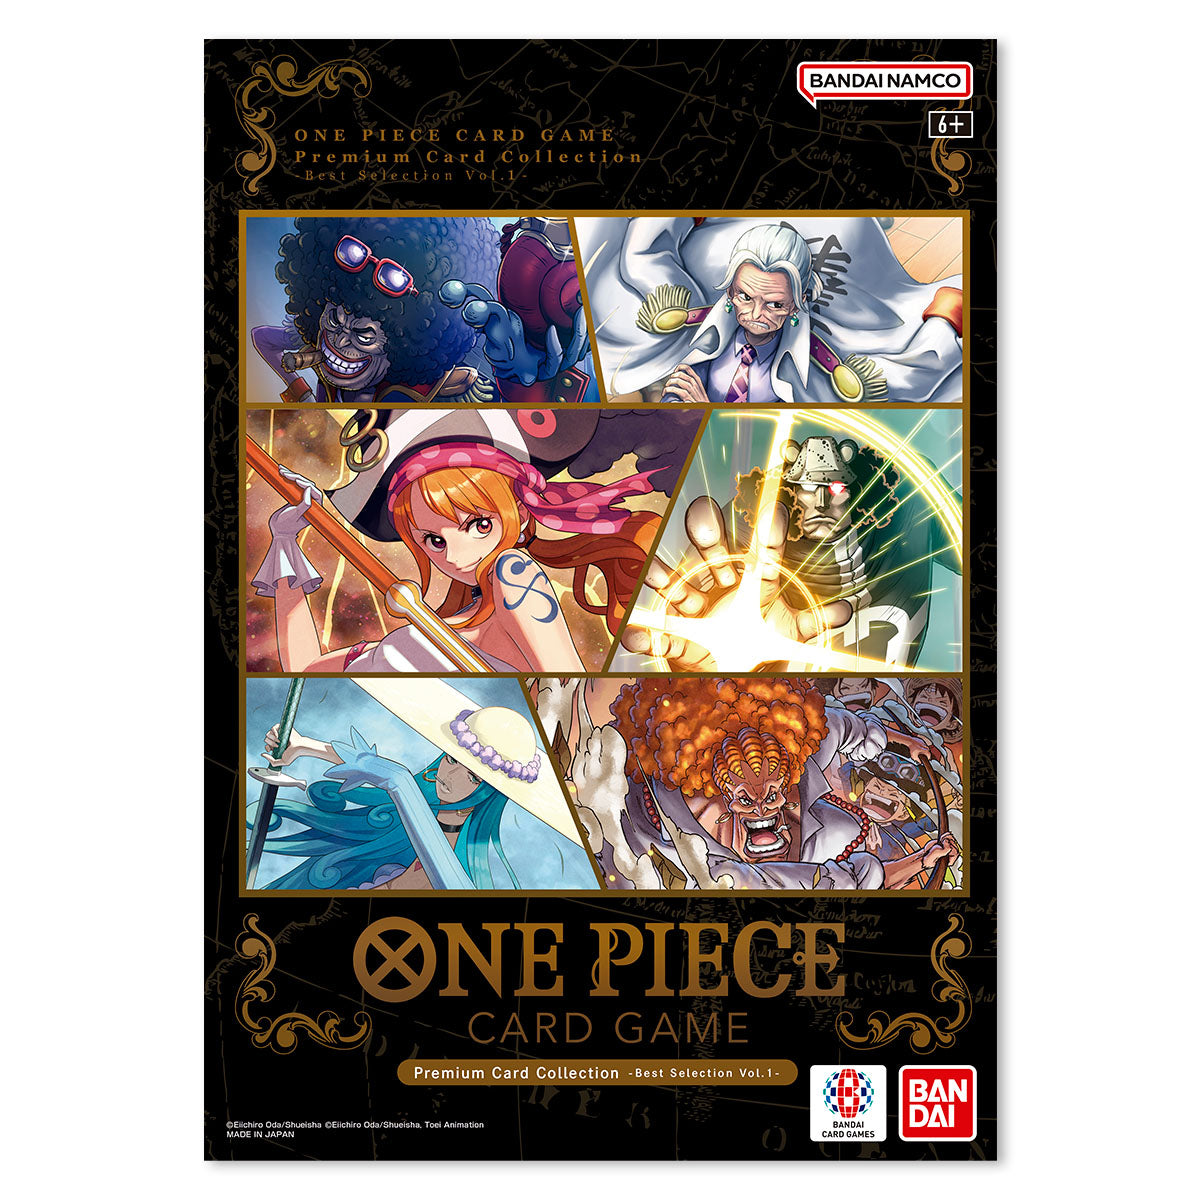 One Piece Card Game: Premium Card Collection - Best Selection Vol 1